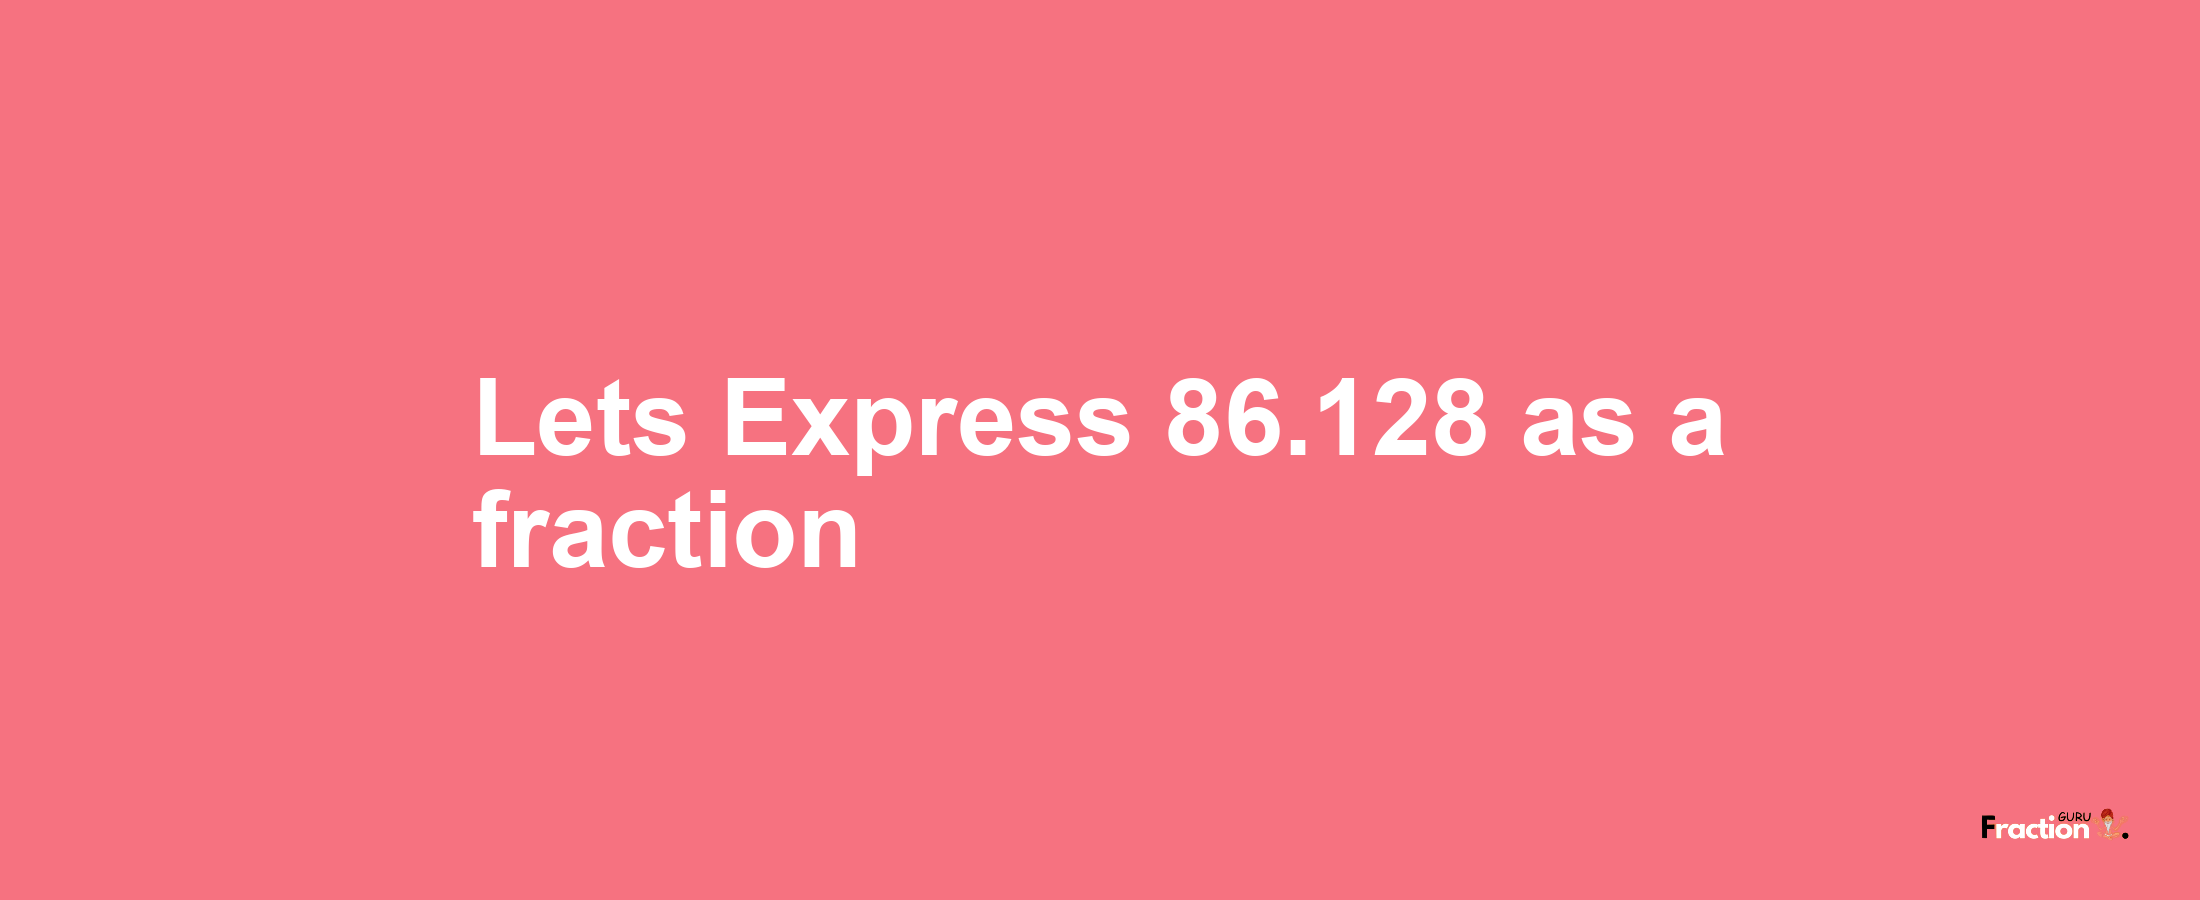 Lets Express 86.128 as afraction